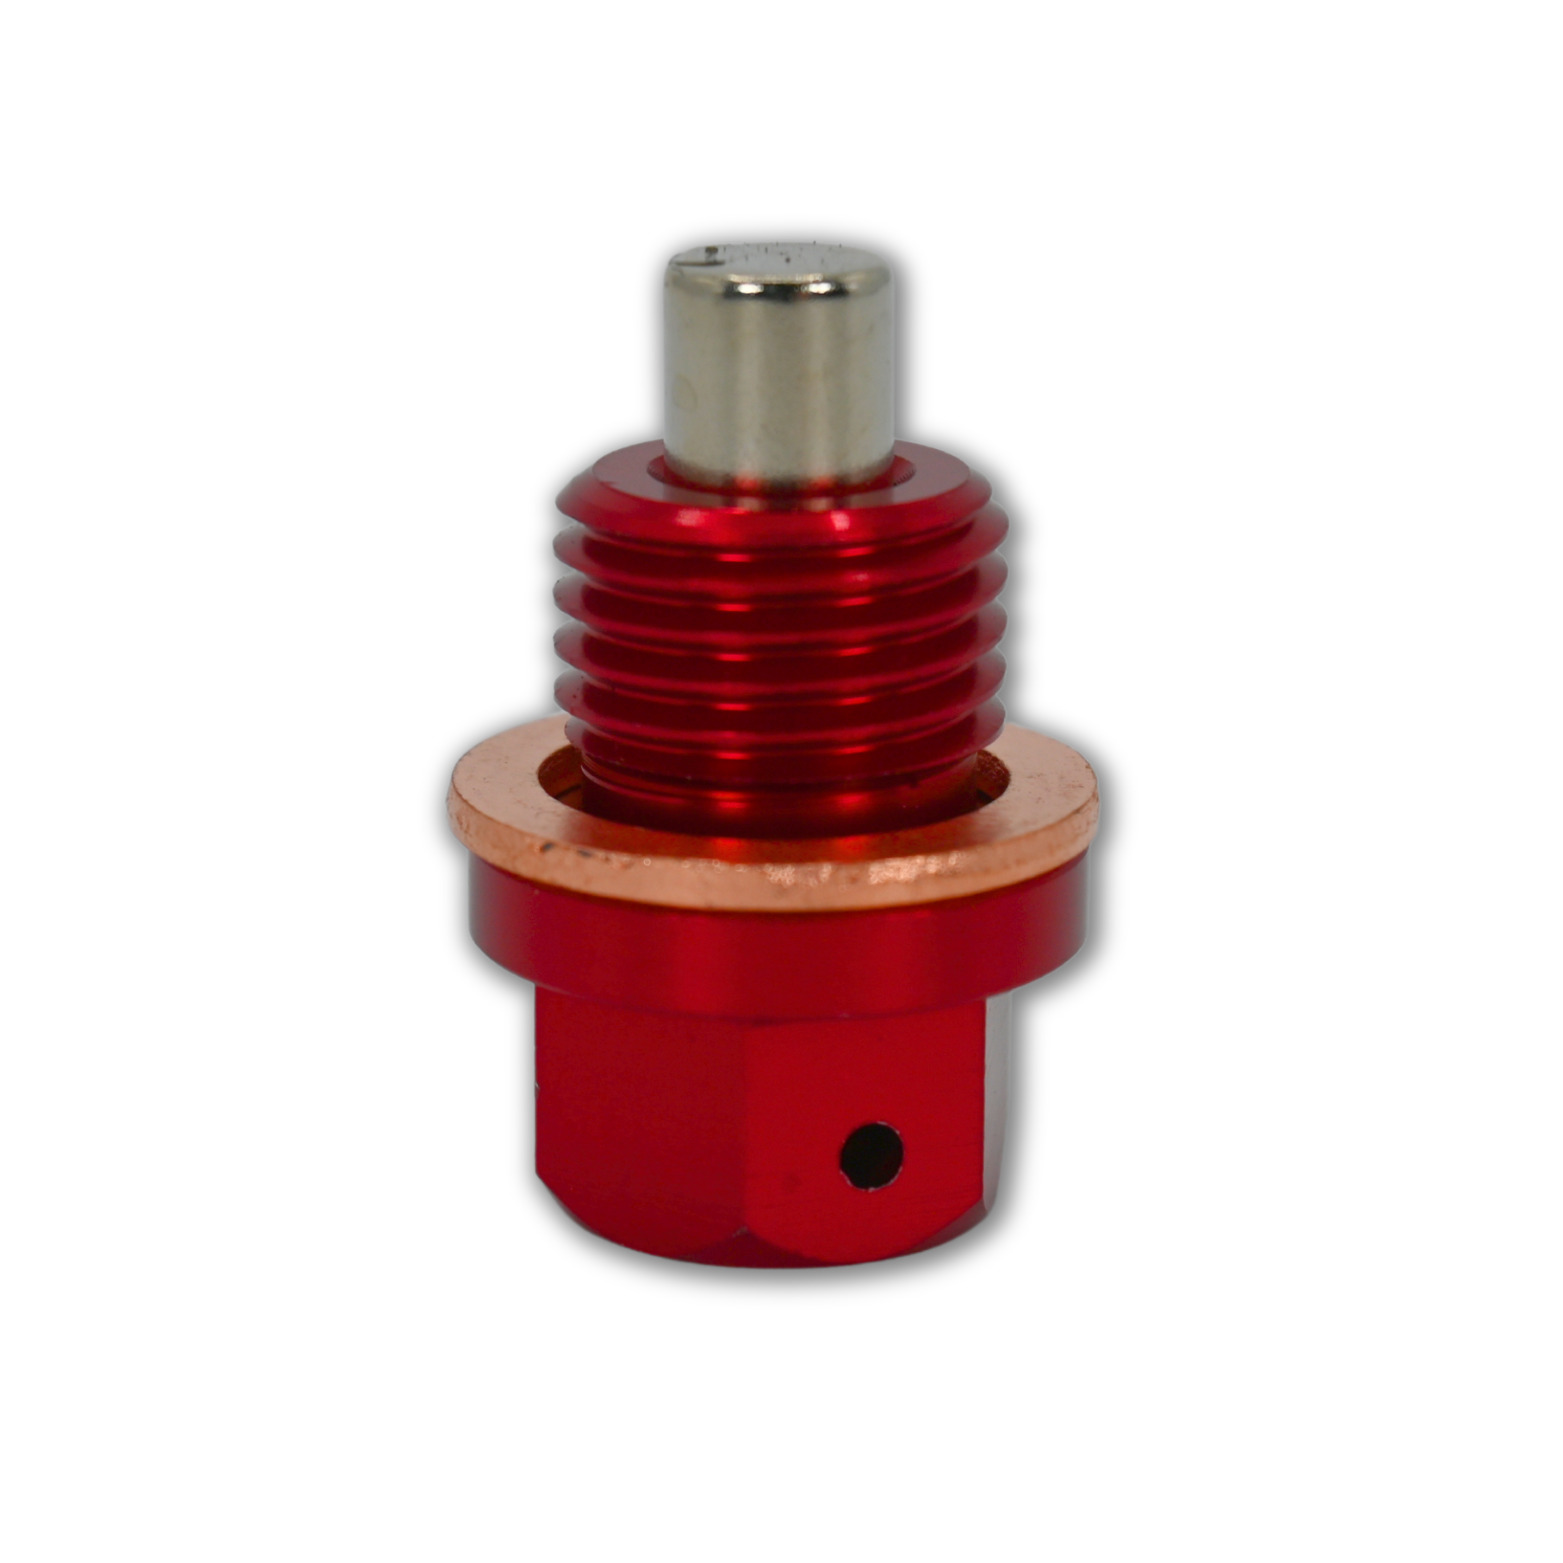 RED RACING MAGNETIC ENGINE OIL DRAIN PLUG FOR 04-10 LOTUS ELISE 12x1.25 MM